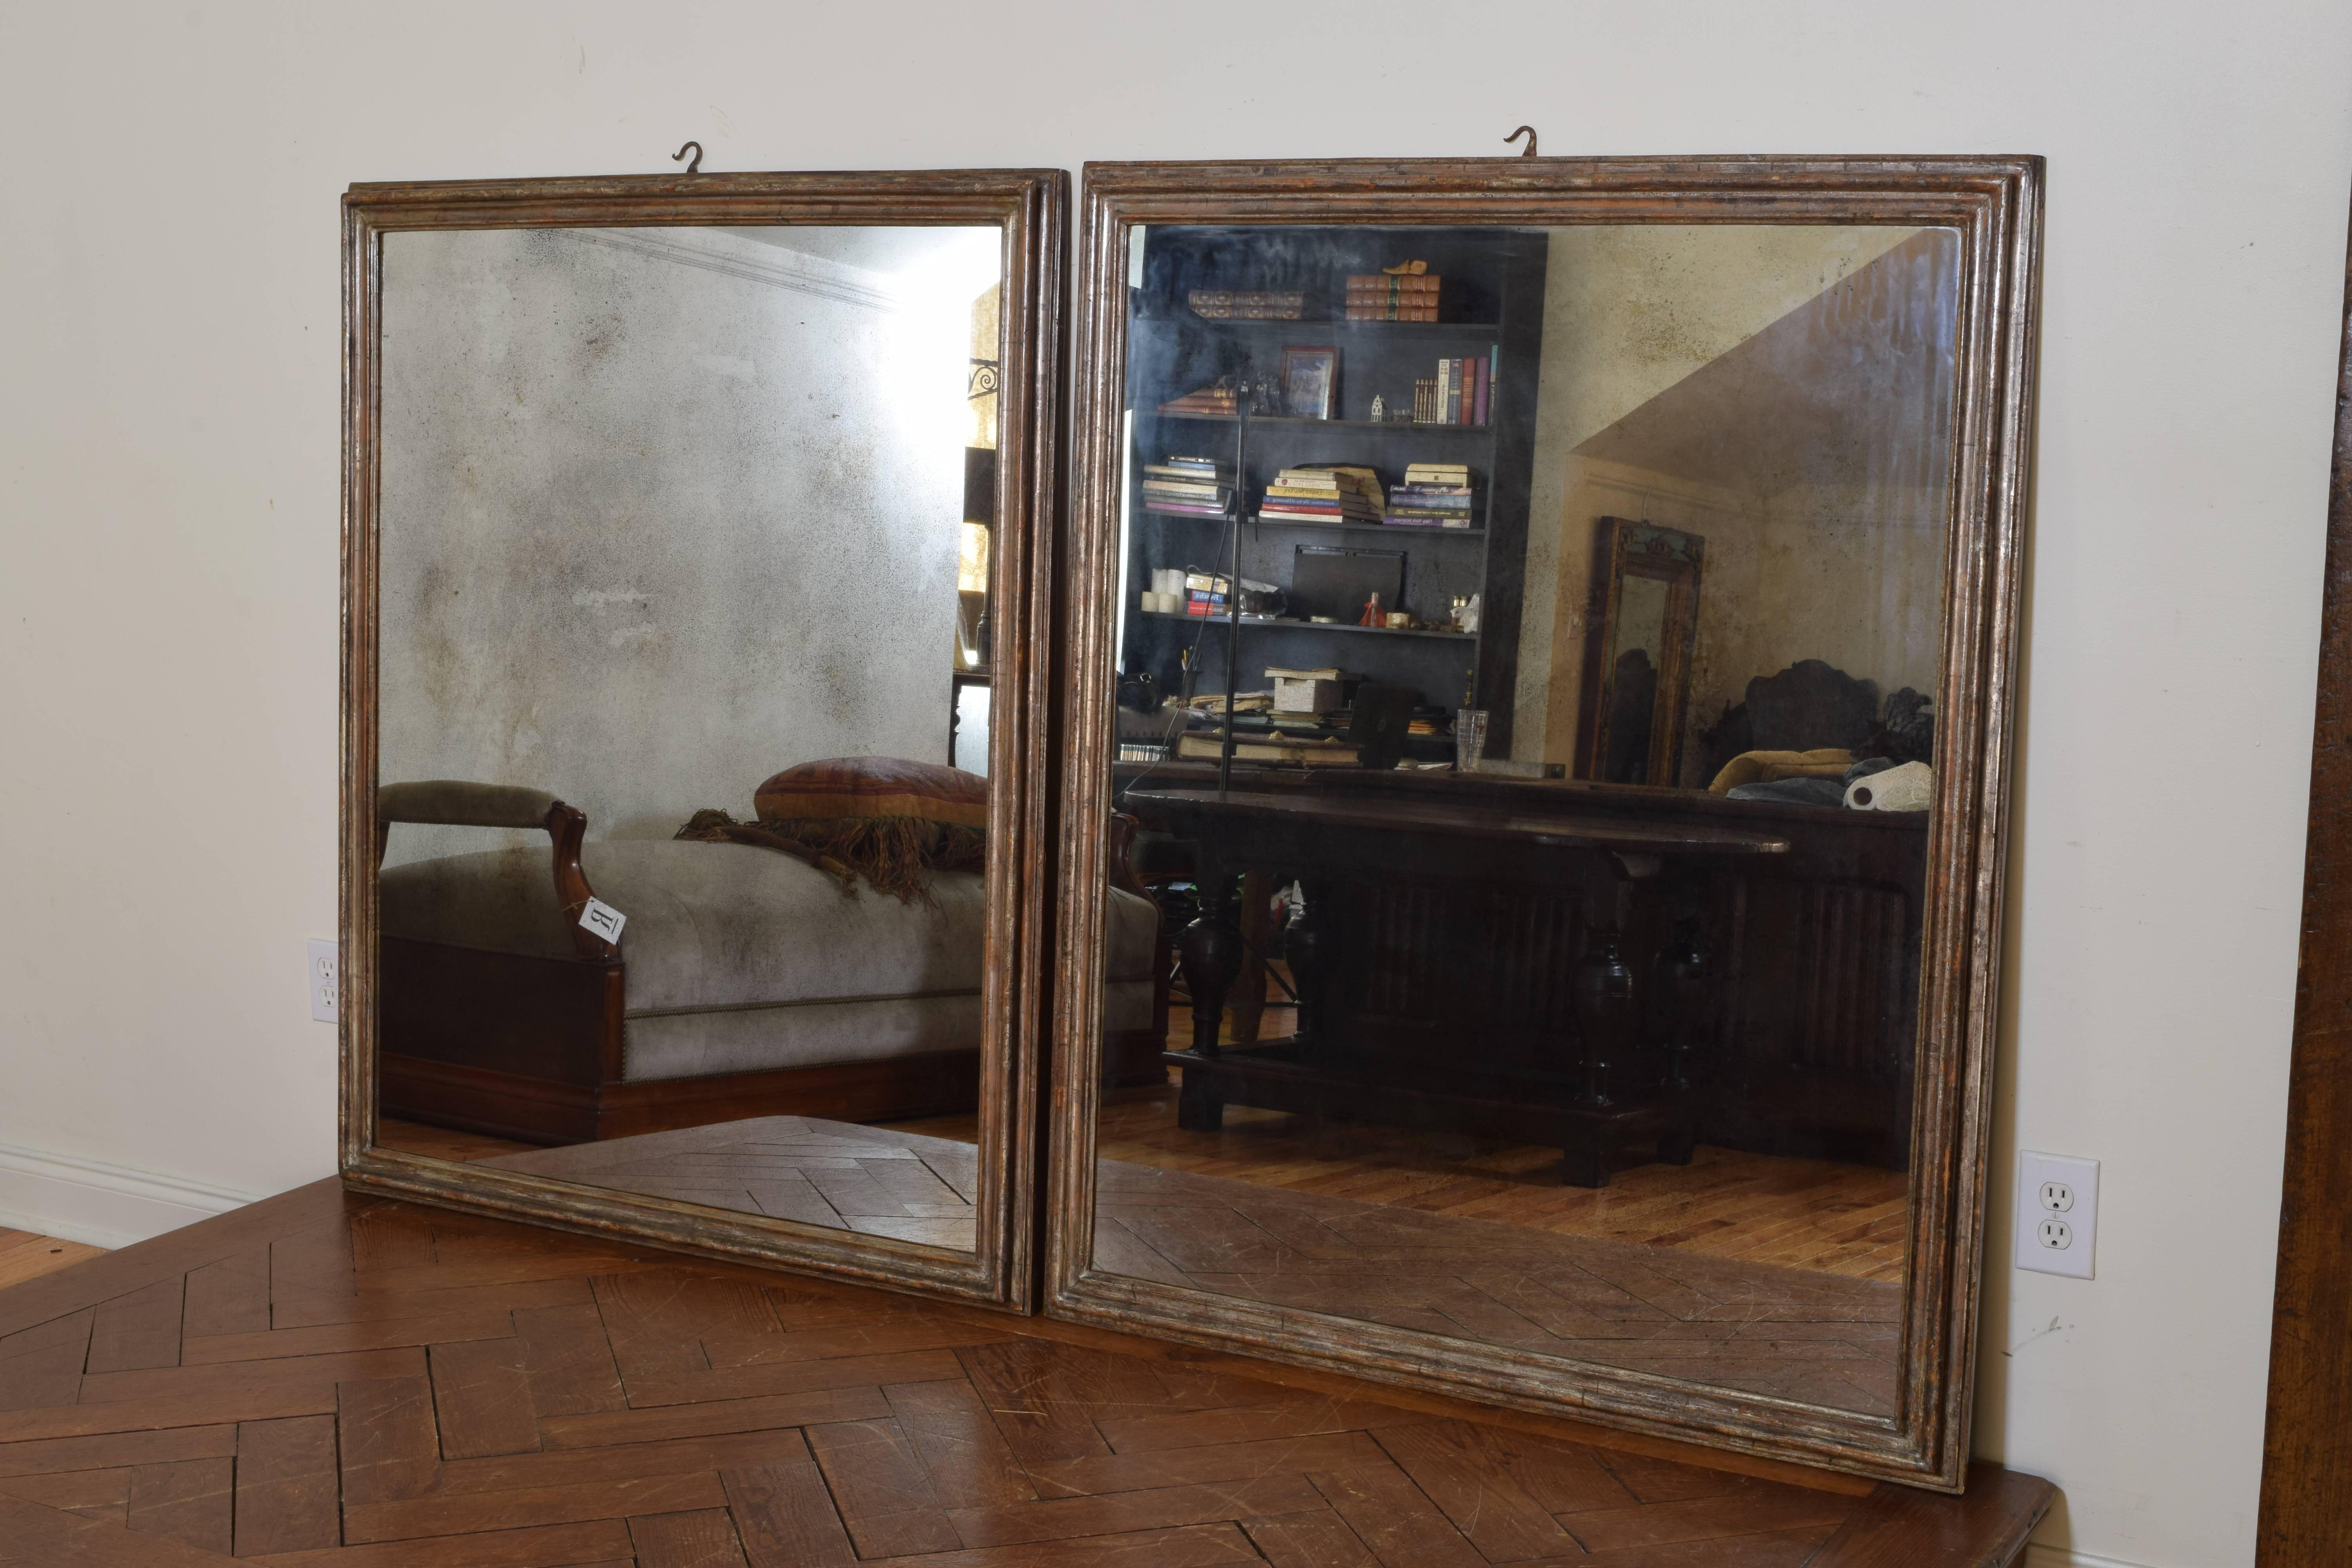 Baroque Pair of Large Italian Carved Wood and Mecca Frames Now Mirrors, Mid-18th Century